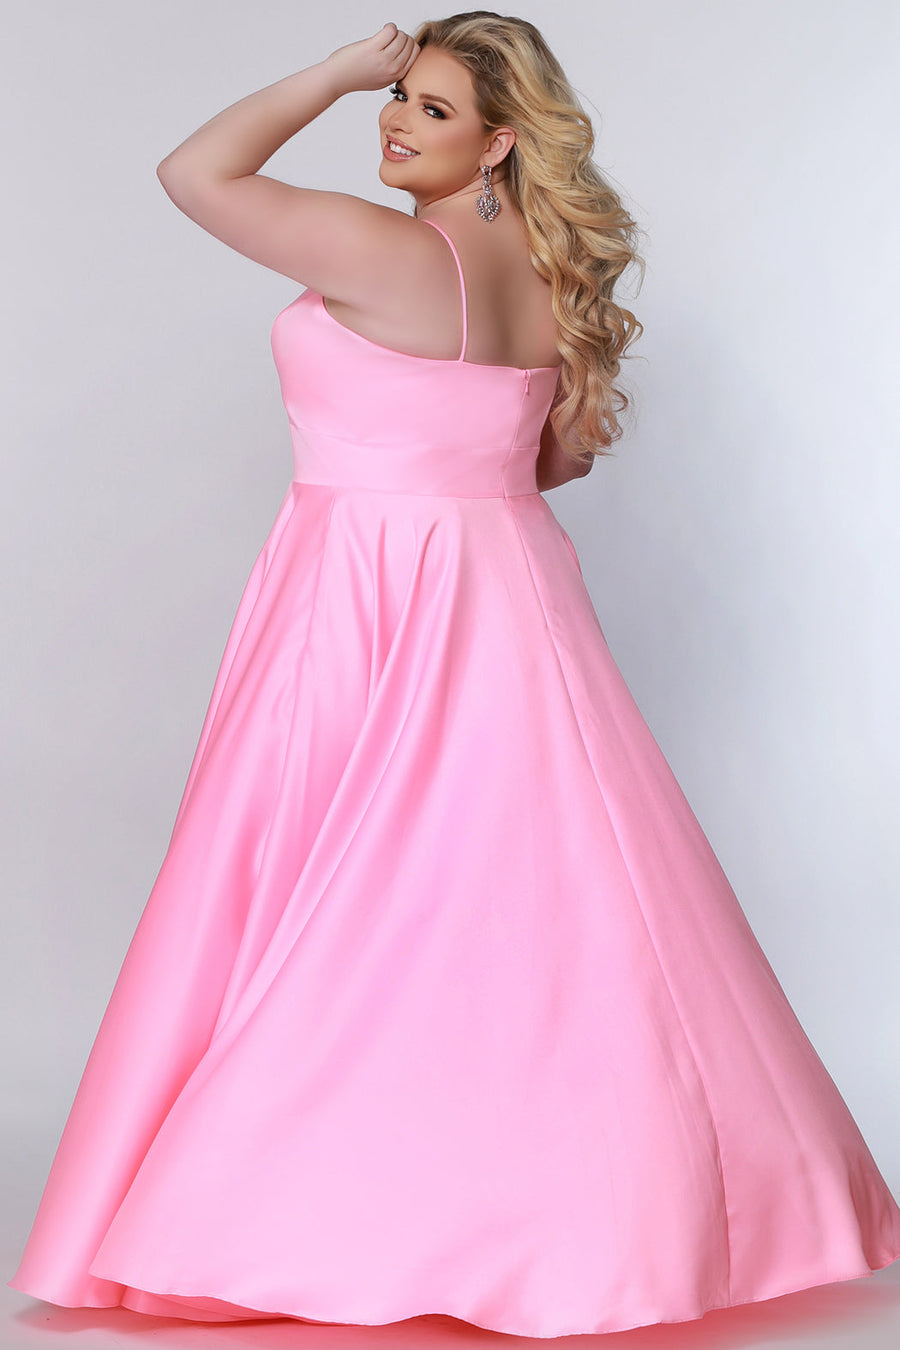 Tease Prom TE2209 Back view Plus size satin  a-line dress in carnation pink with spaghetti straps, a deep v-neckline and a slit.